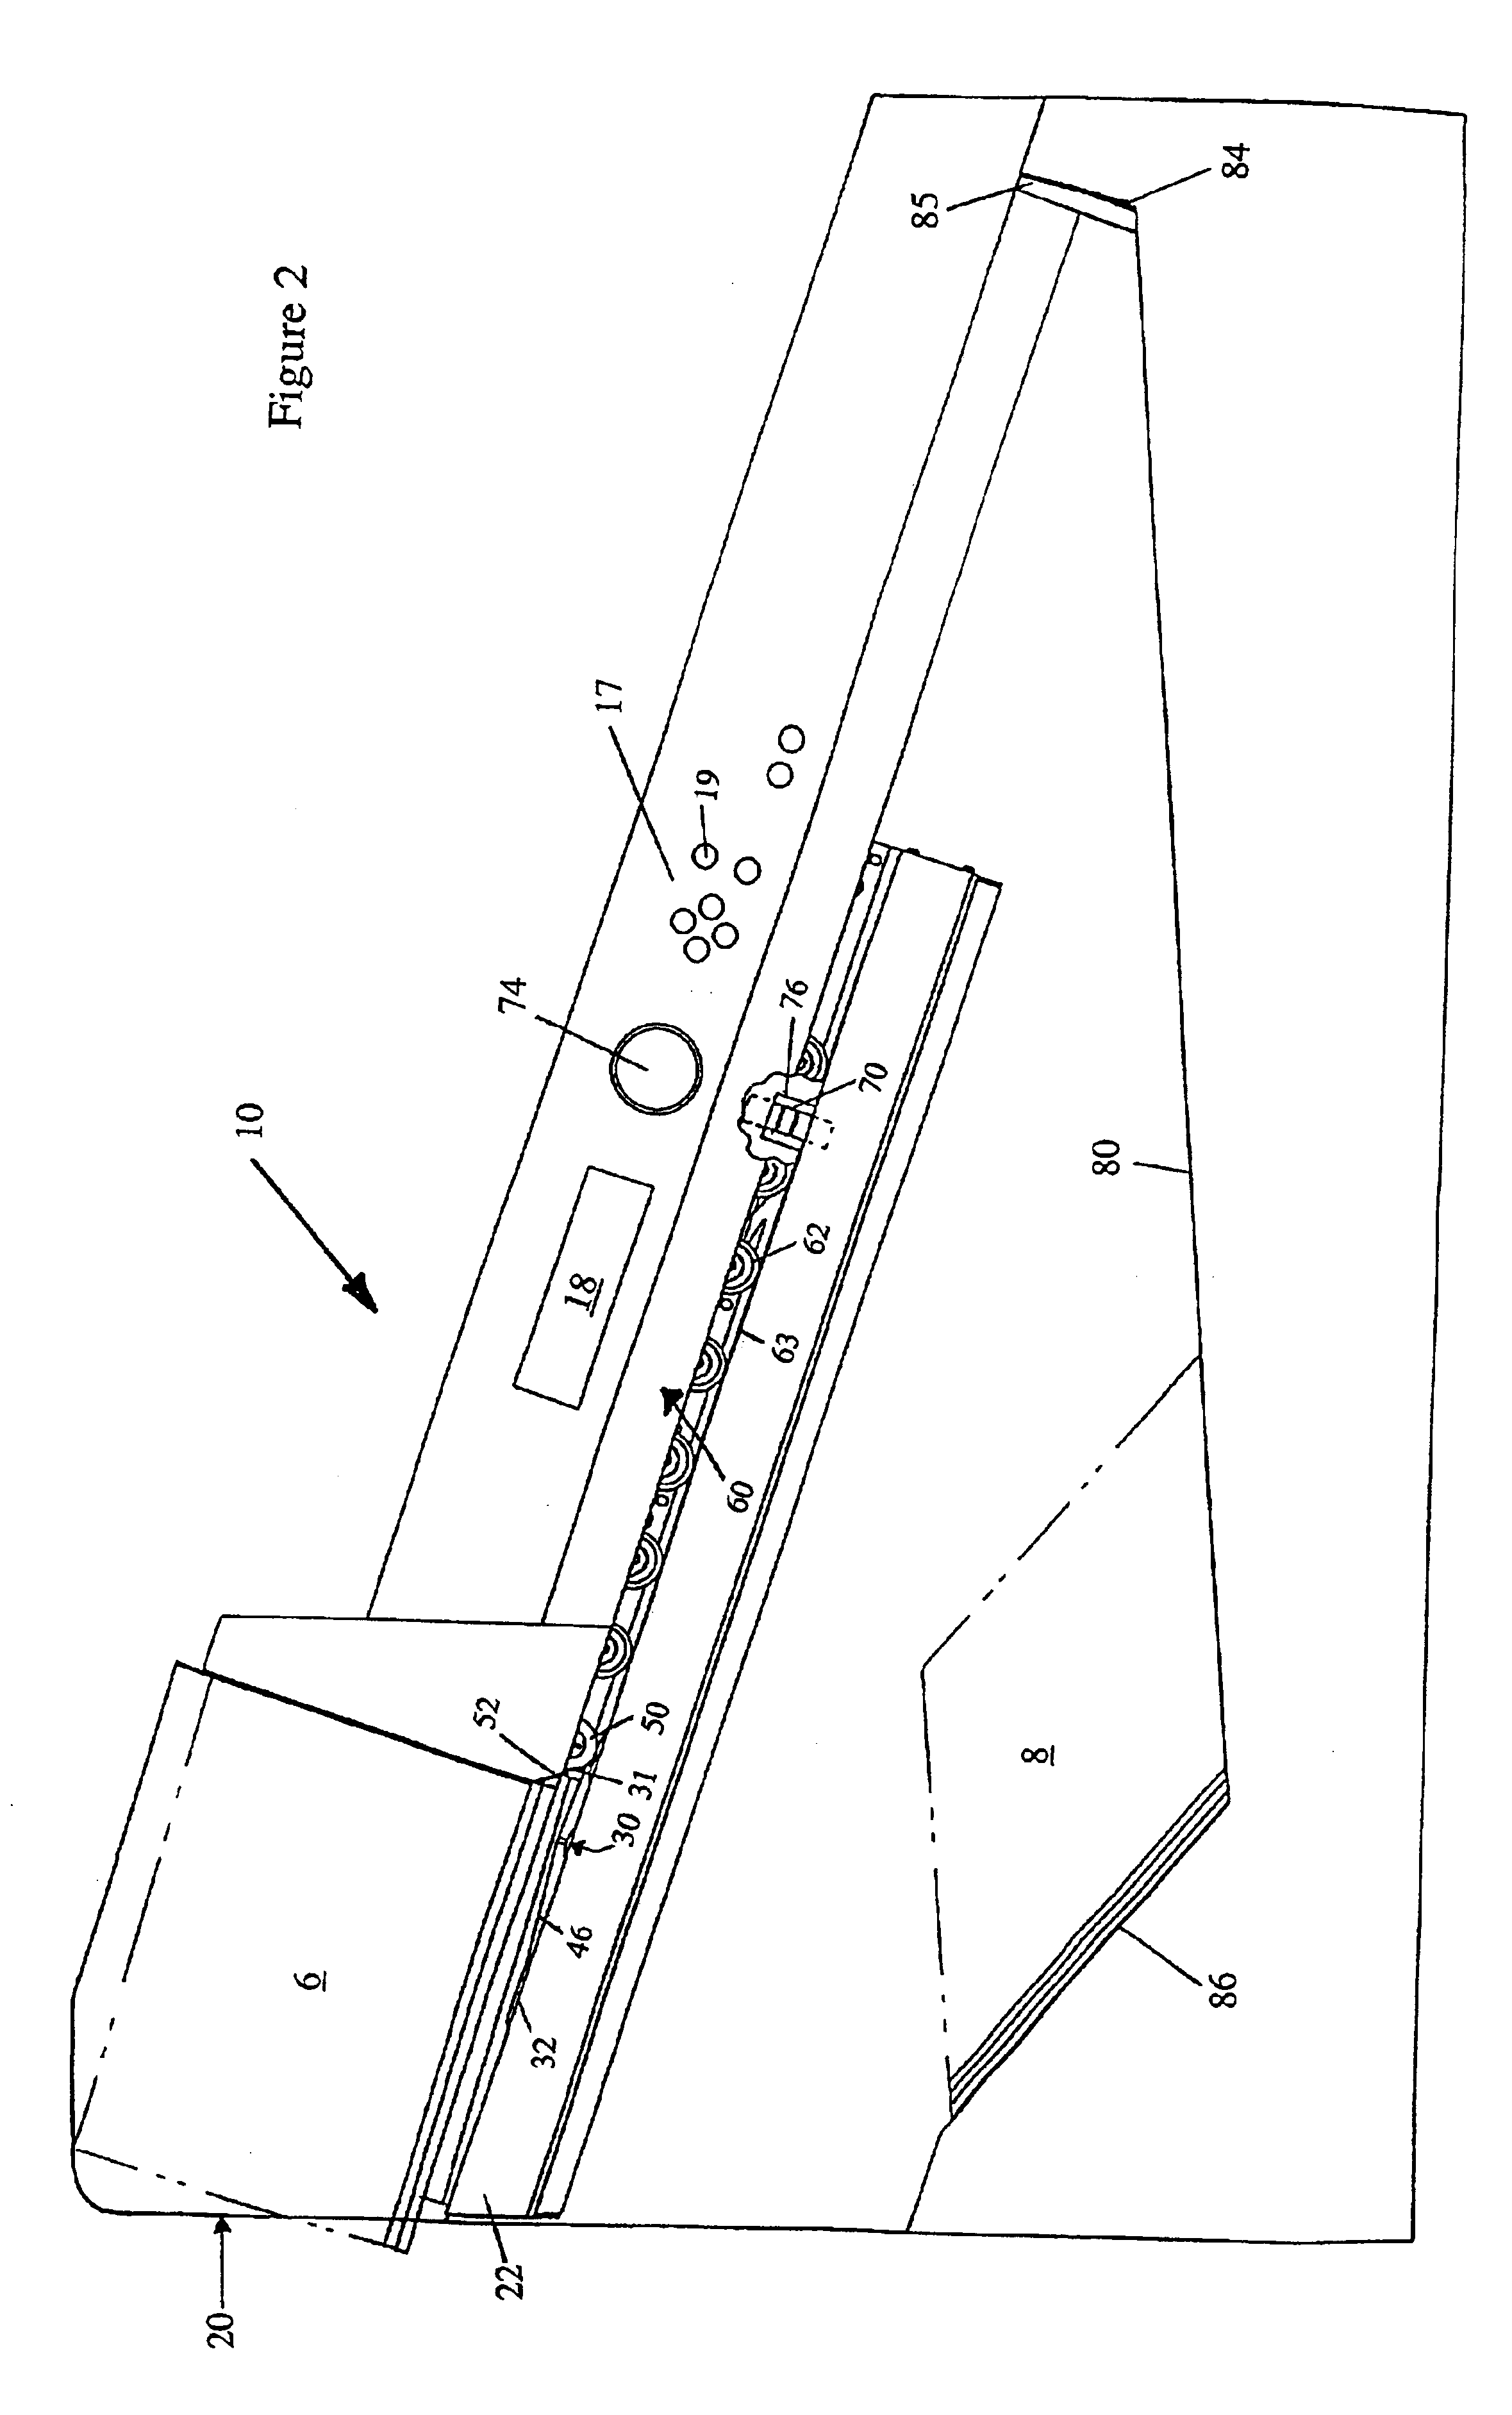 Apparatus for opening envelopes